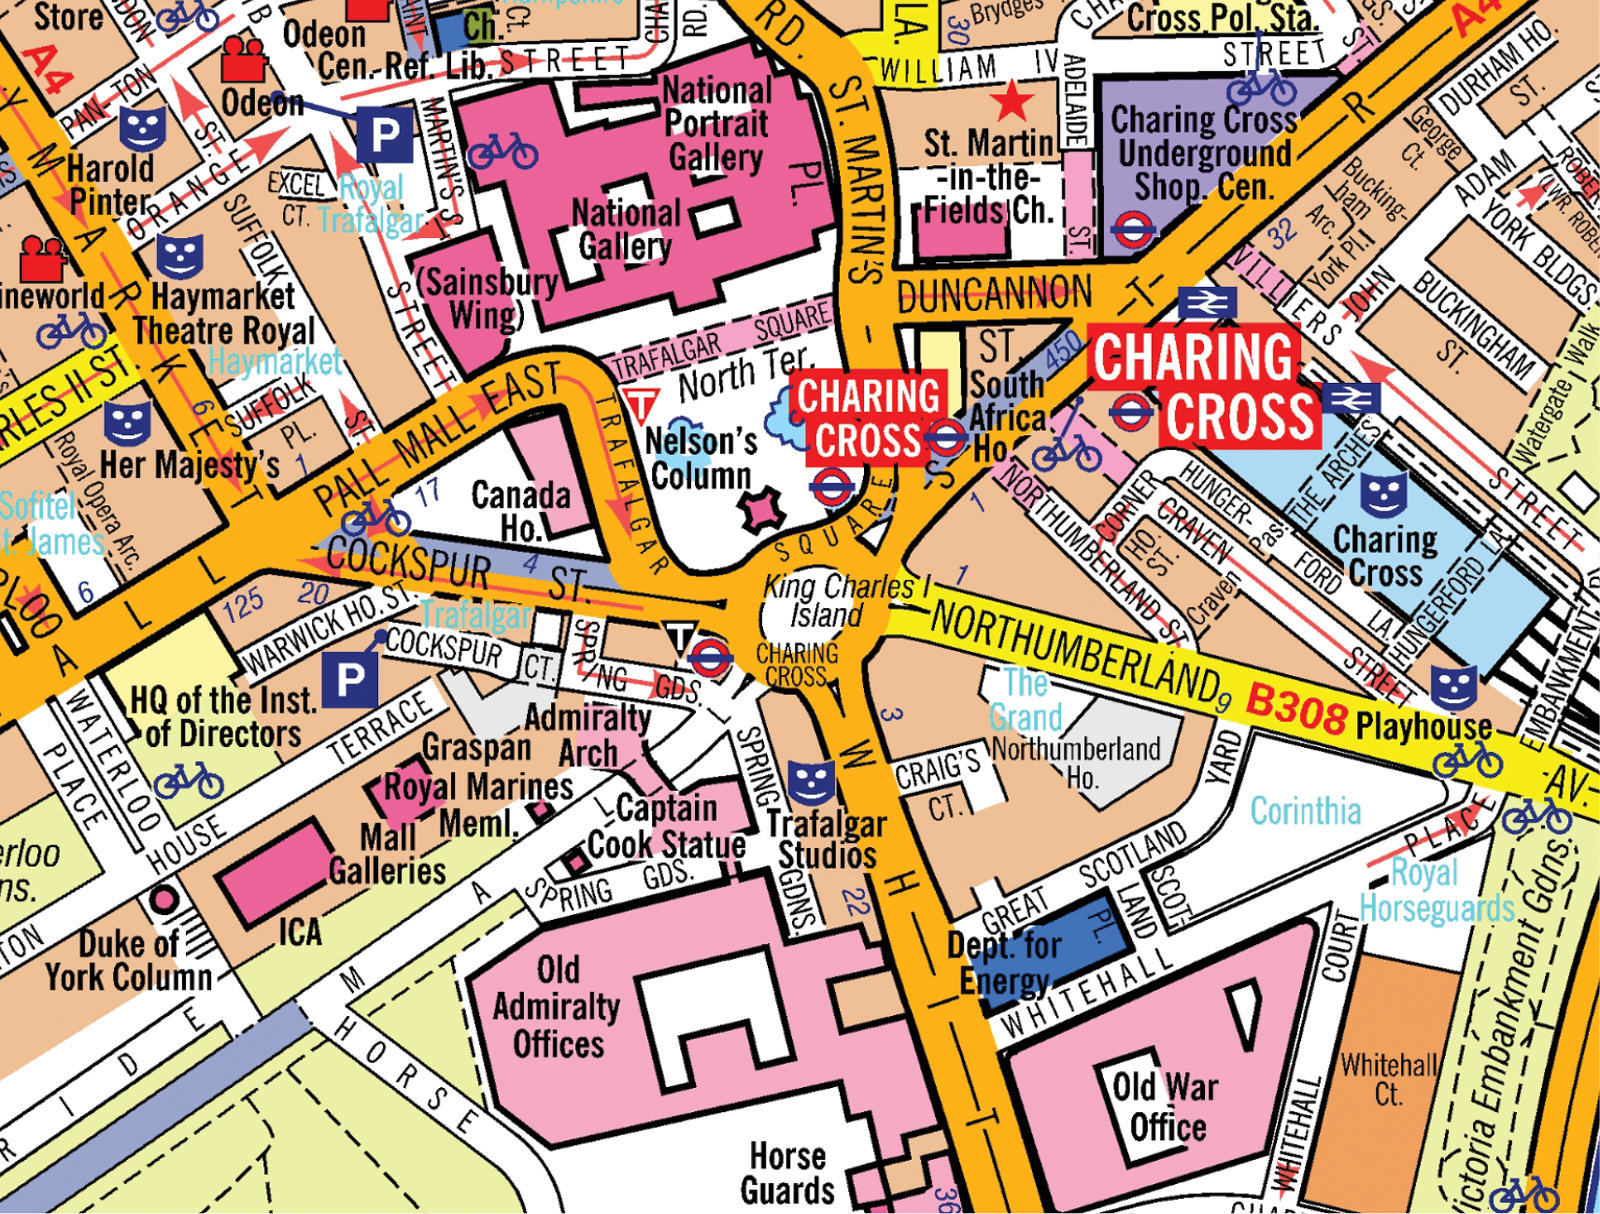 The front of a postcard depicting a map of central London with street names, landmarks, tube stops, parking garages, theatres, and several other points of interest.